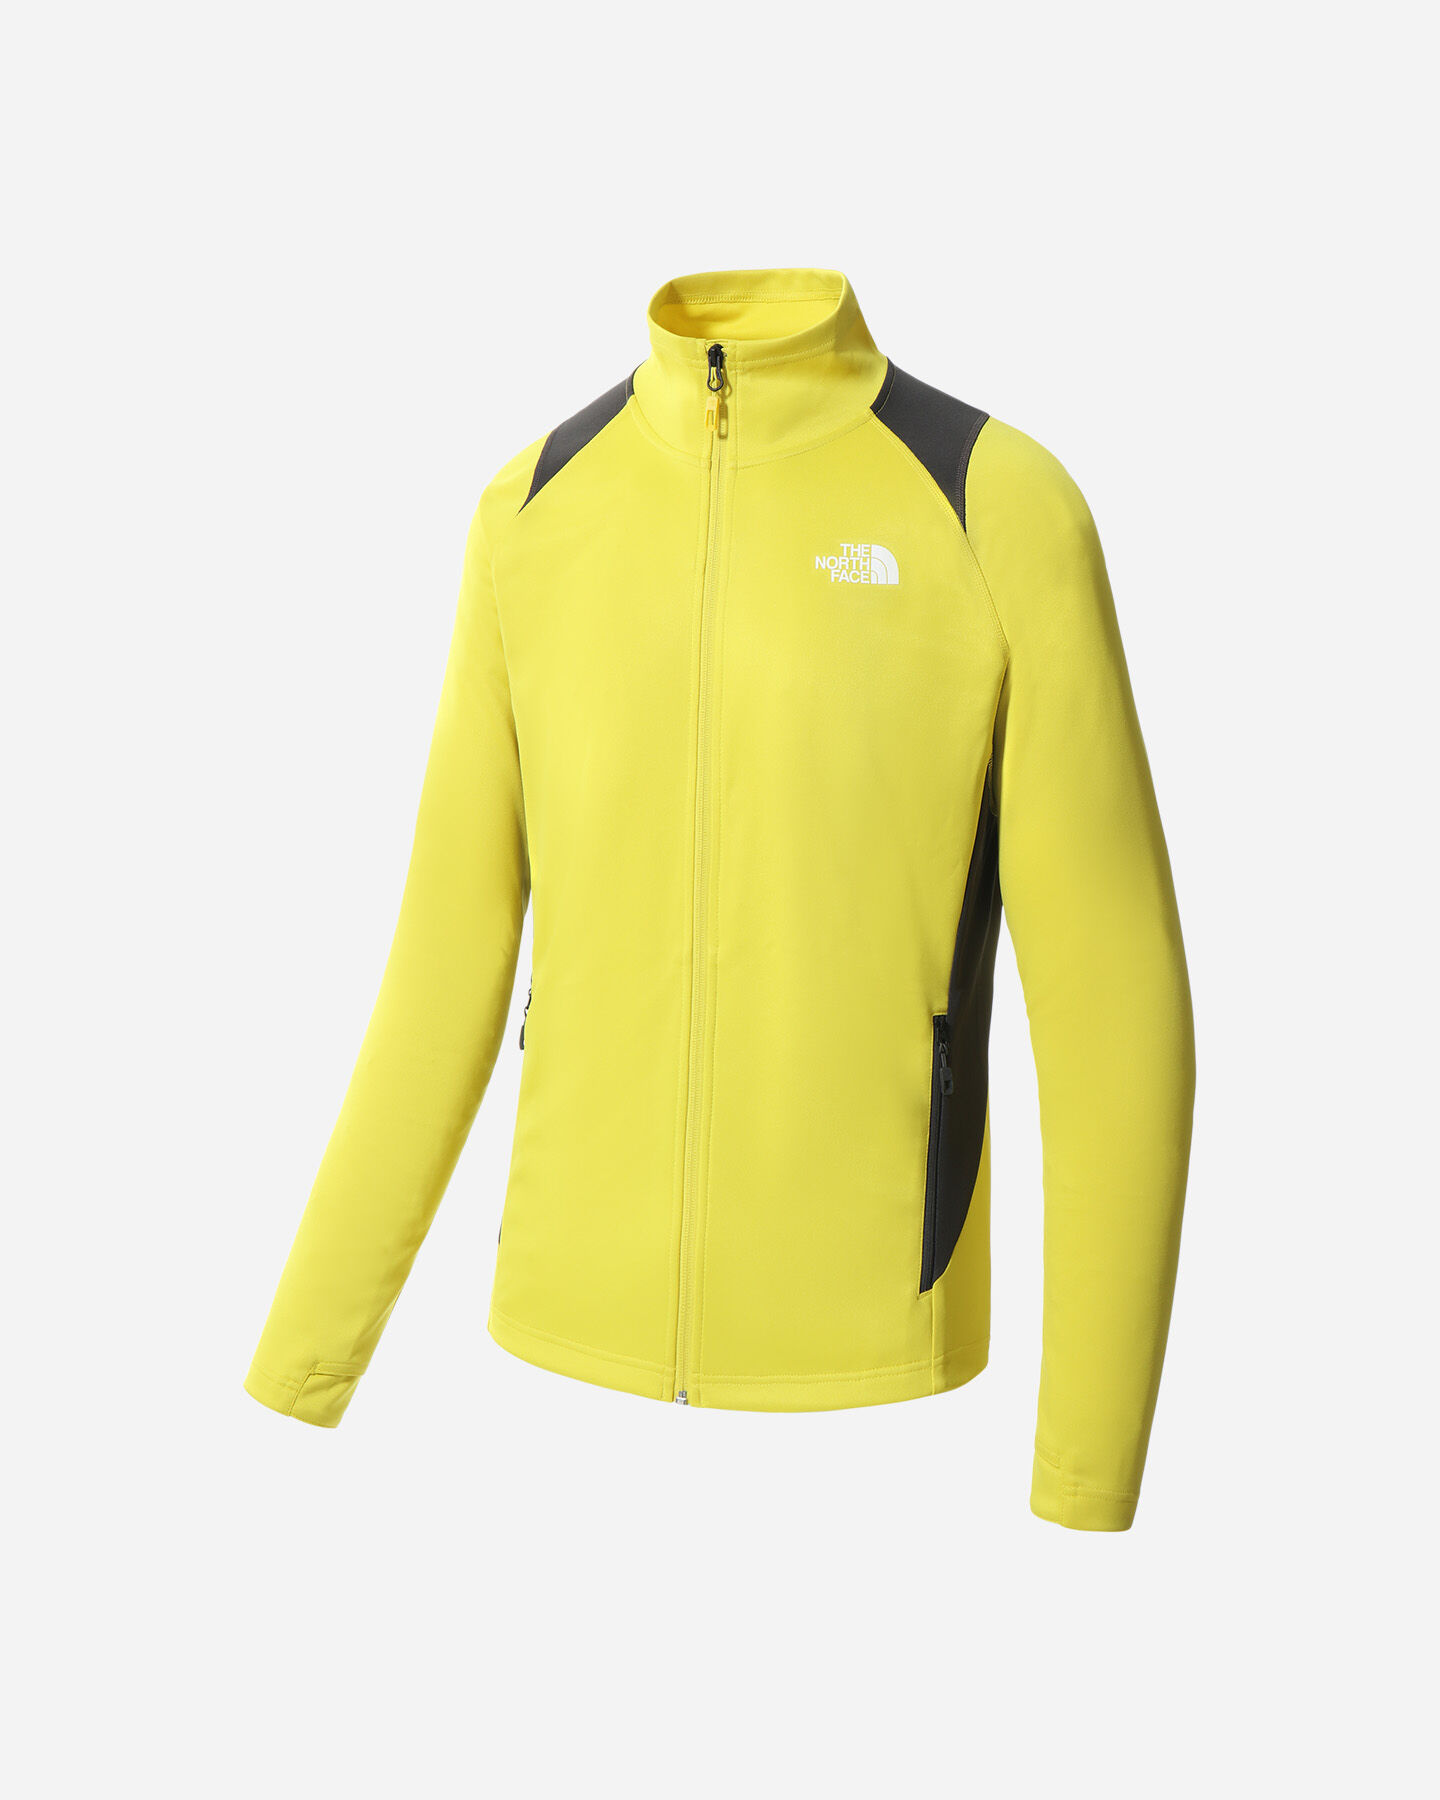  Pile THE NORTH FACE FULL ZIP MIDLAYER M S5423236|W8B|L scatto 0